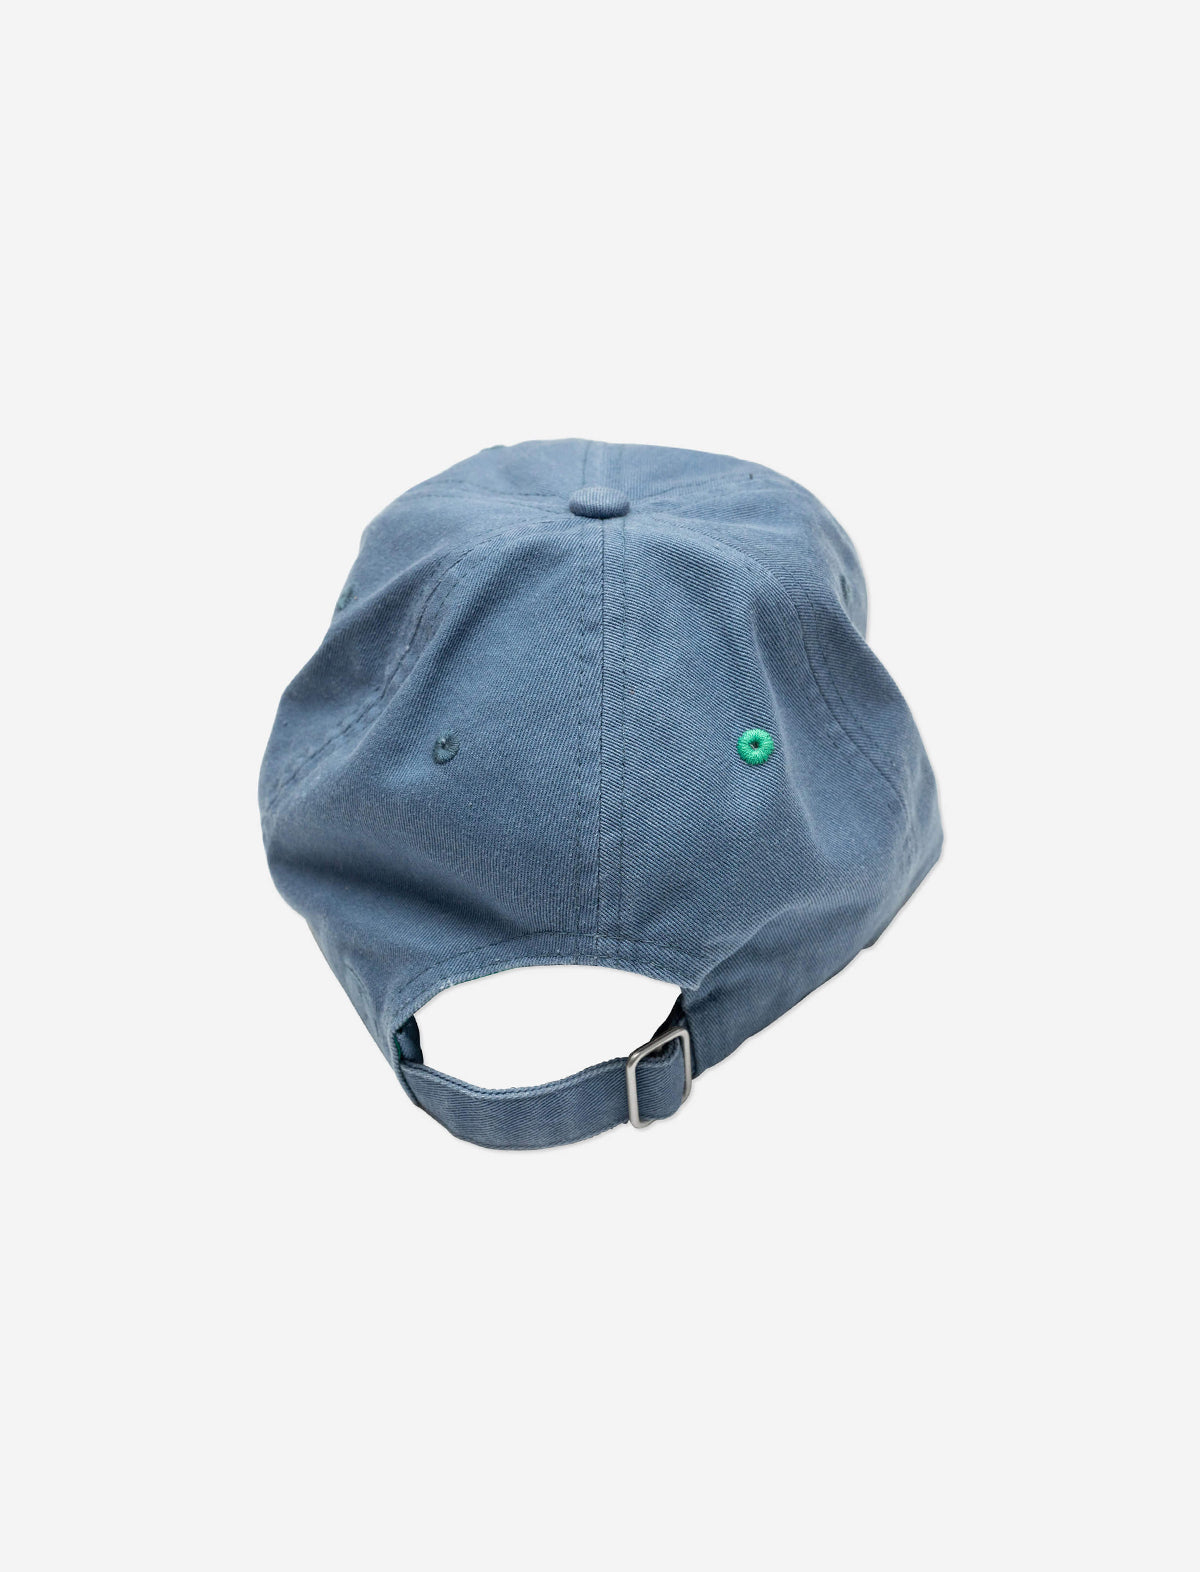 THE GOLFERS JOURNAL The Signature Cap in Light Blue